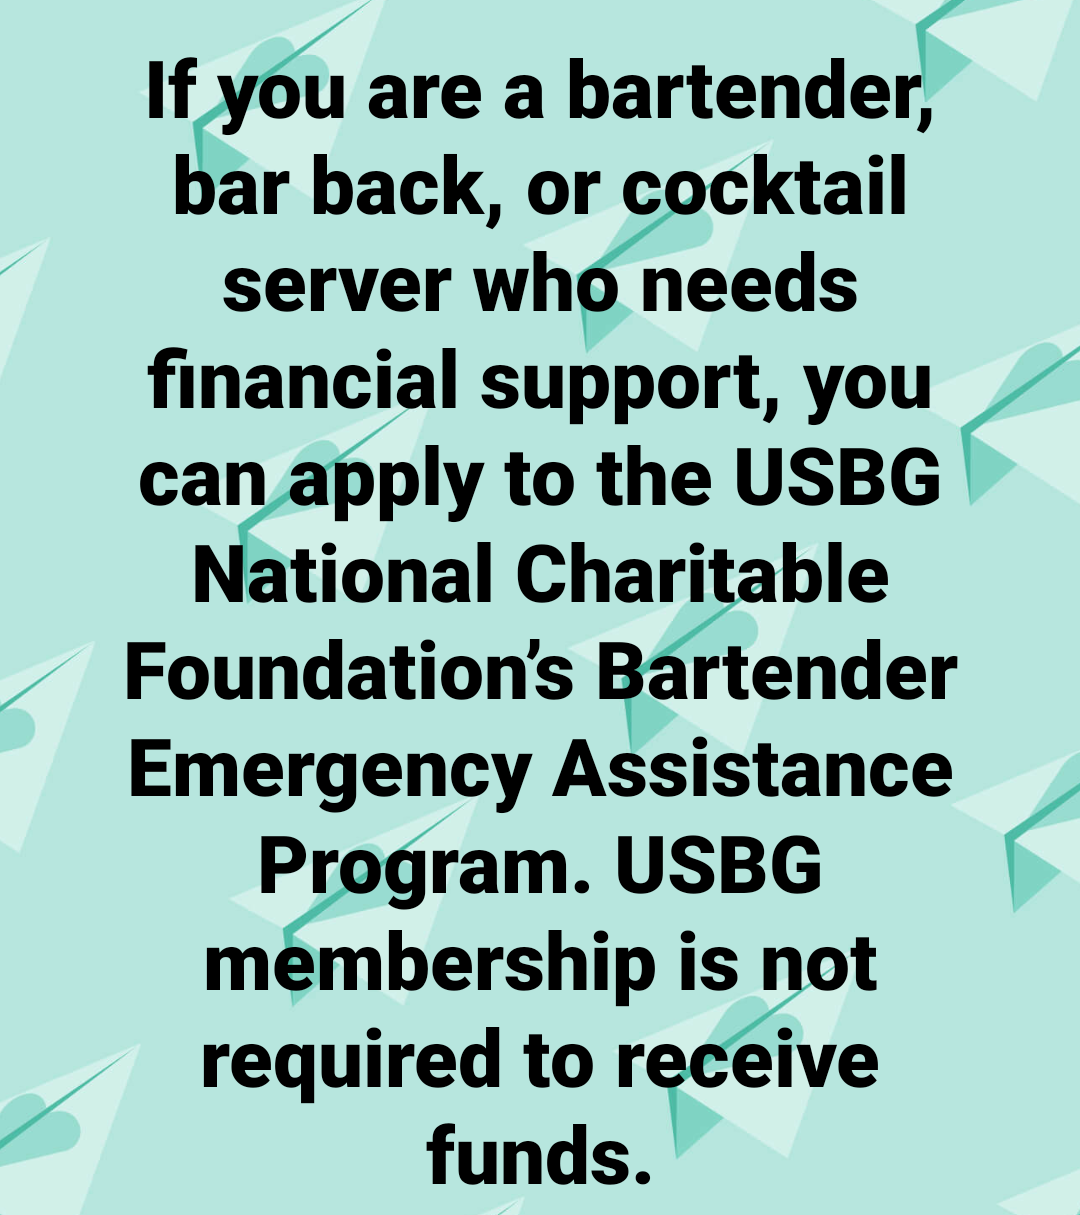 angle - If you are a bartender, bar back, or cocktail server who needs financial support, you can apply to the Usbg National Charitable Foundation's Bartender Emergency Assistance Program. Usbg membership is not required to receive funds.